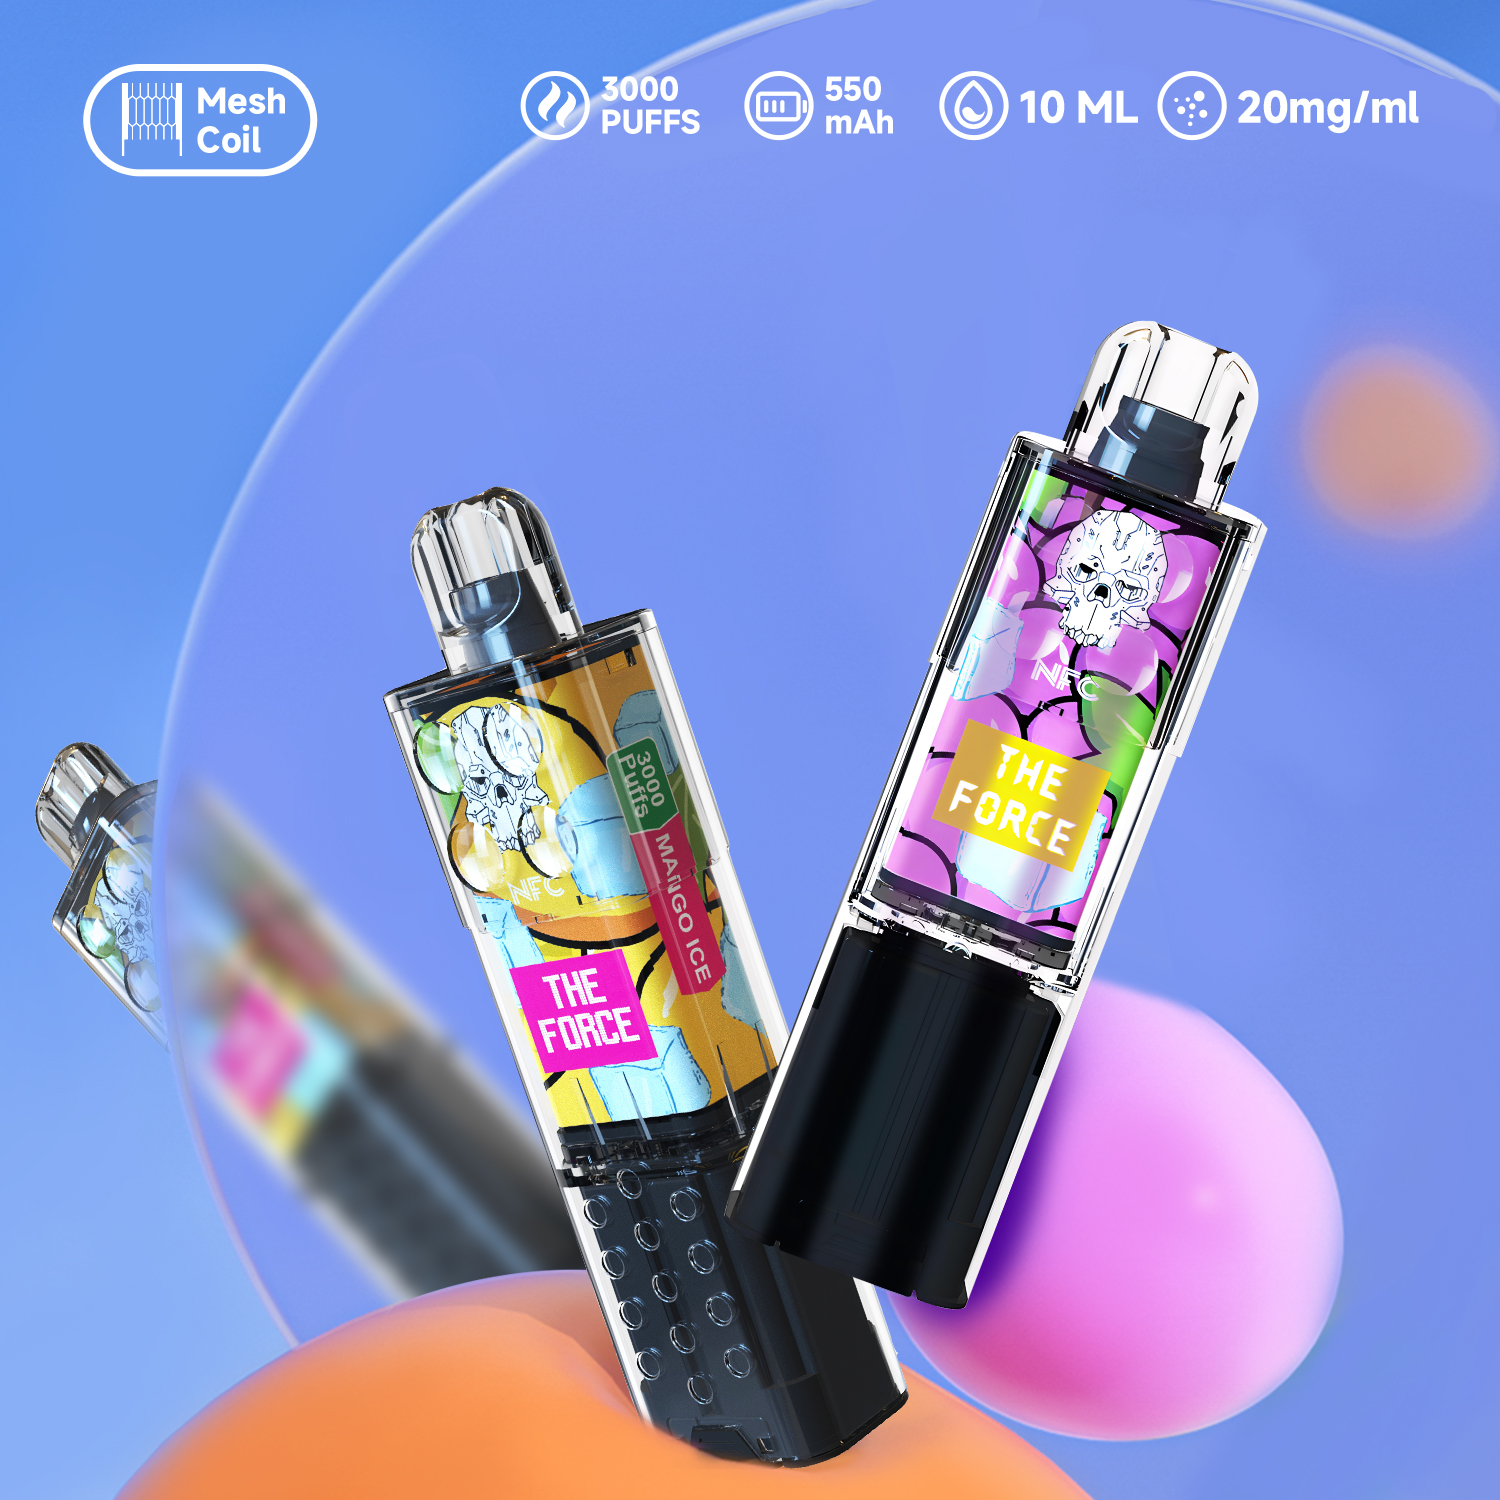 Ejuice Store offers a wide range of premium disposable vape that are fully customizable with the most popular top-tier flavors at the lowest possible prices.